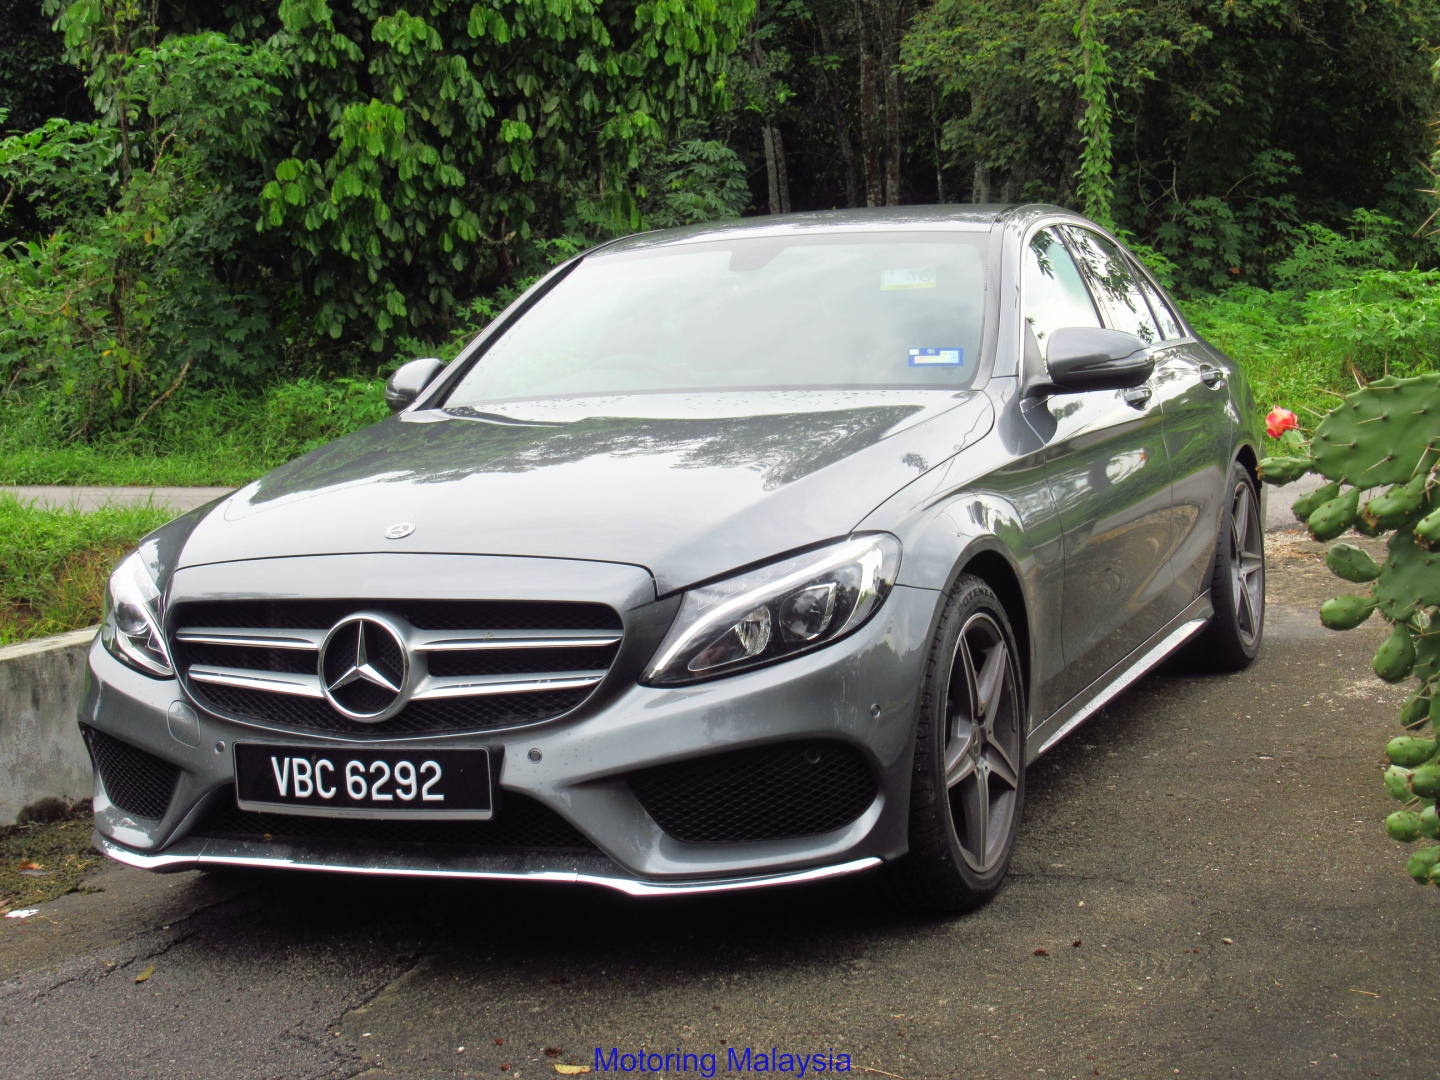 Motoring-Malaysia: Pictorial: The W205 Mercedes-Benz C-Class is a  Masterclass of Design - Featuring the Pre-facelift C200 AMG-Line